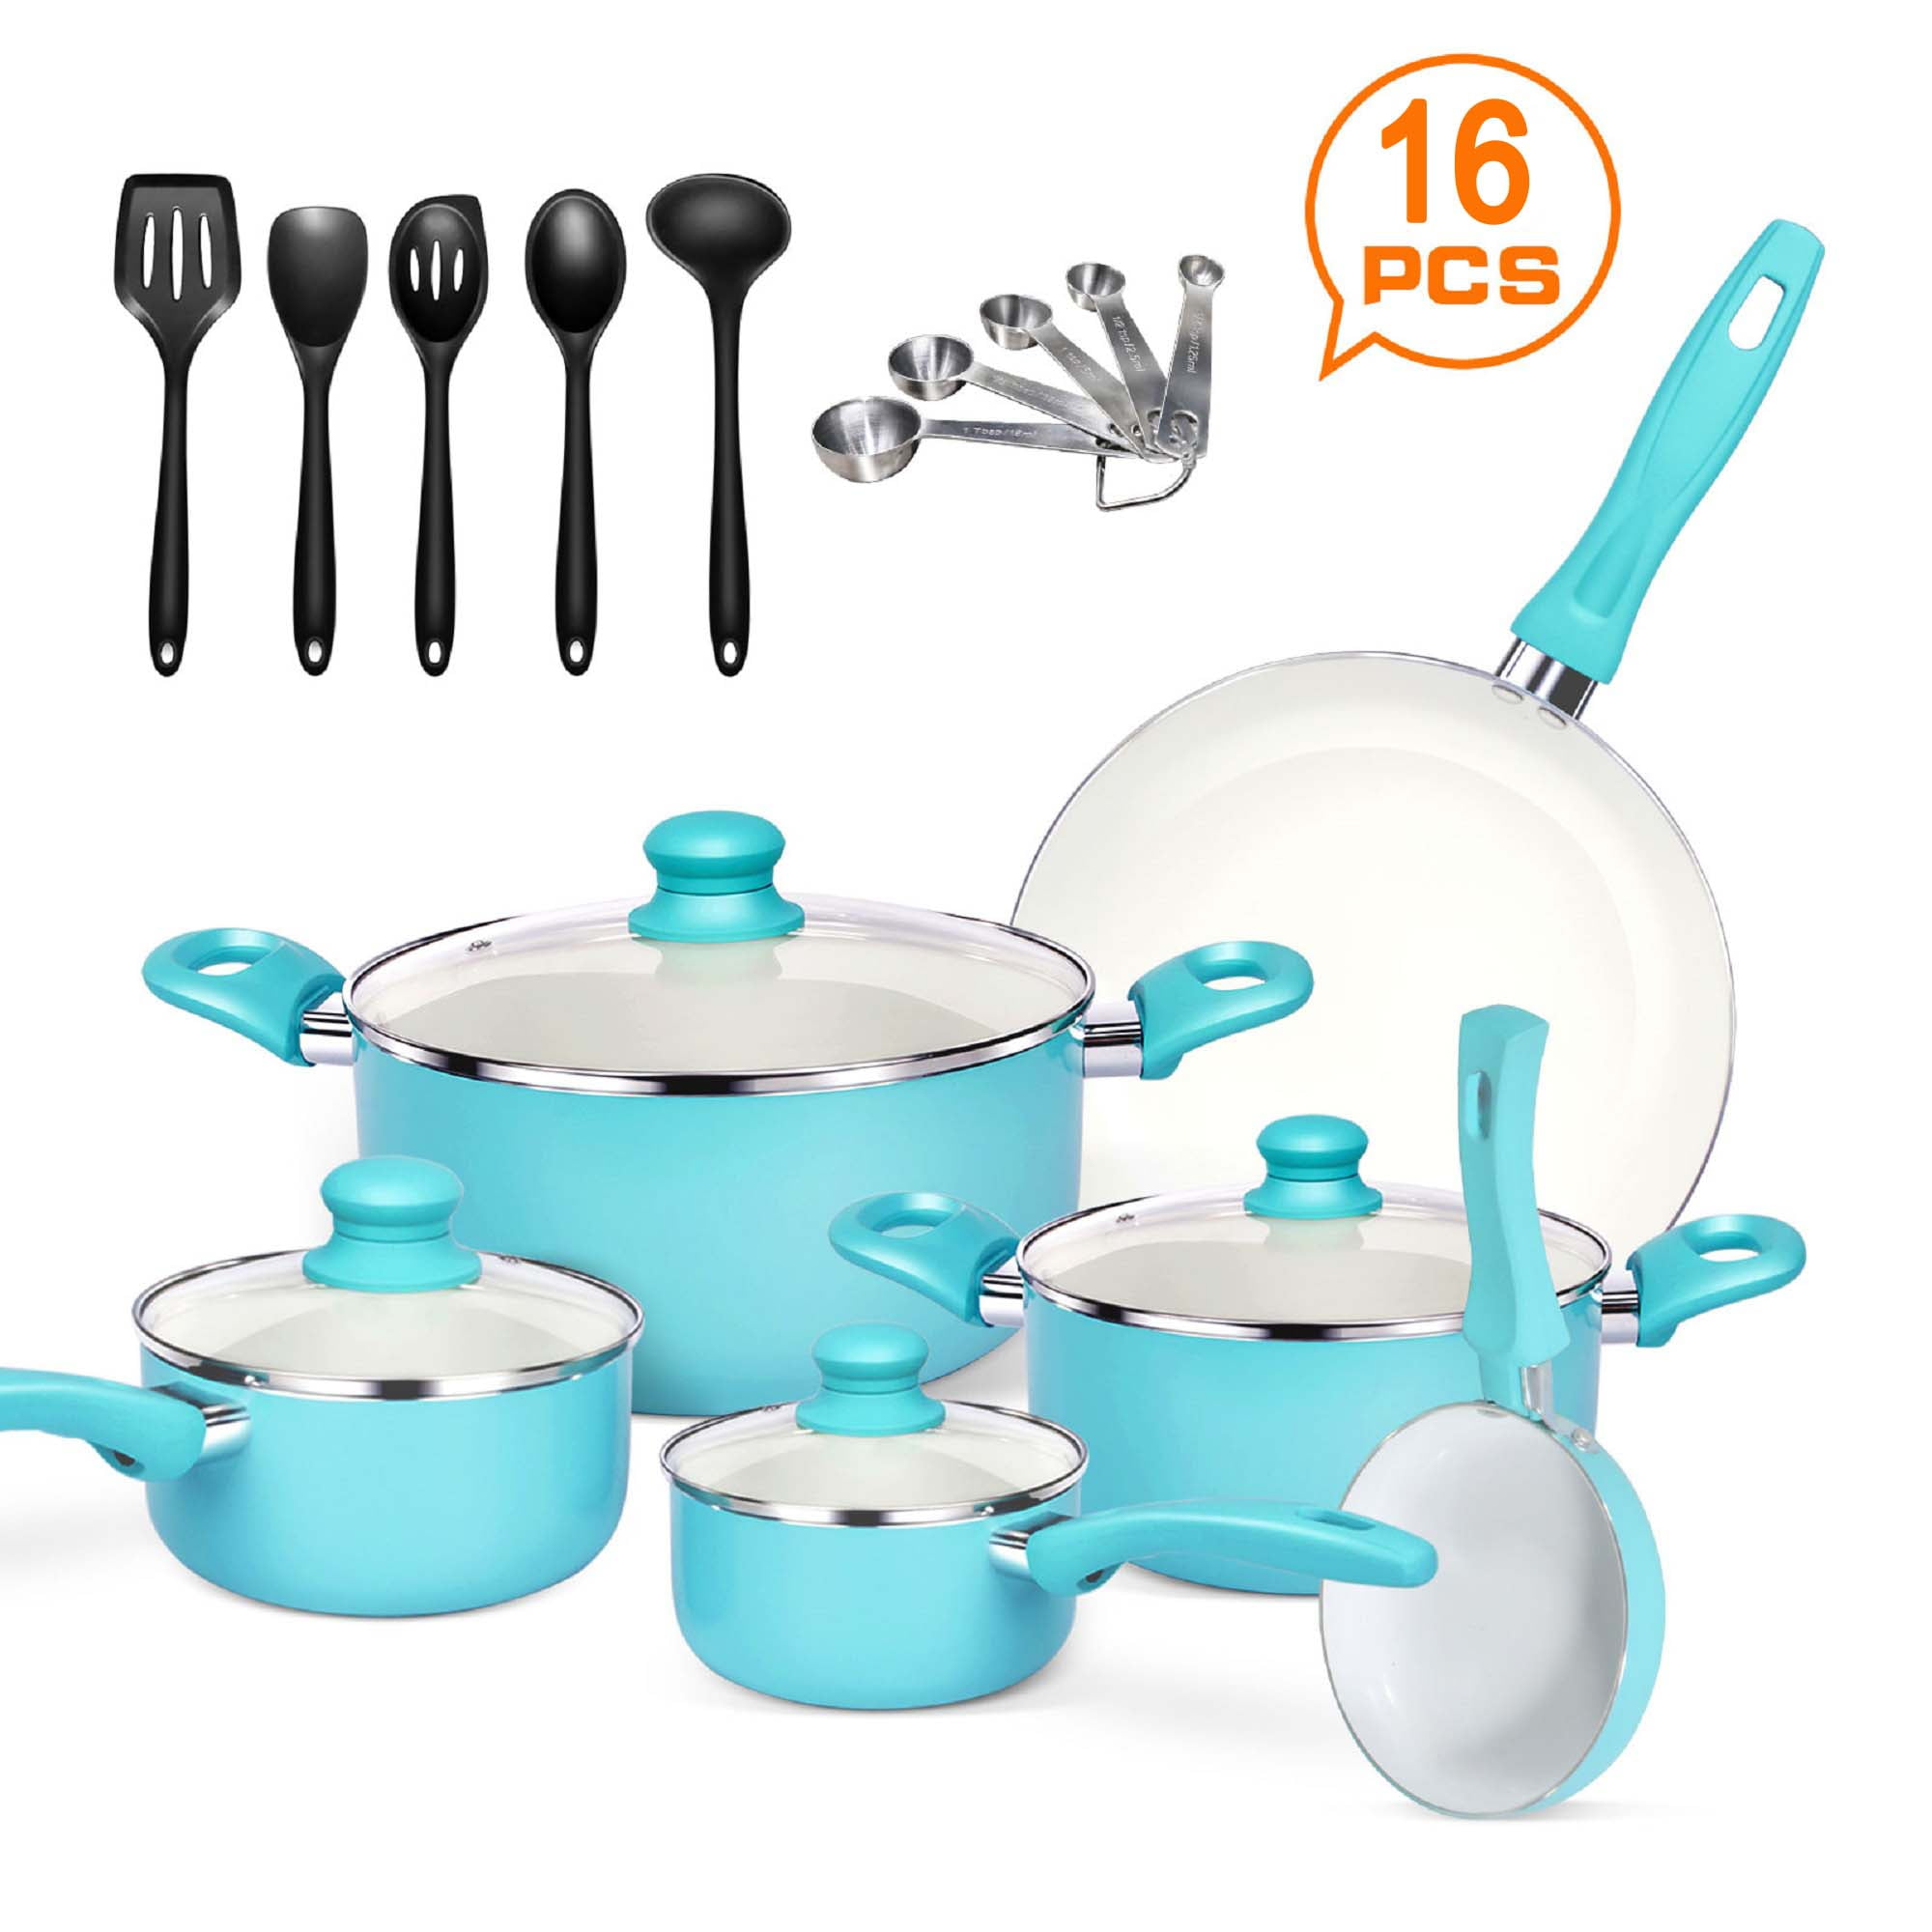 Masthome 16 Piece Ceramic Nonstick Cookware Set,Soft Grip Healthy Pots and  Pans Set with Lids and Utensils for Kitchen,PFAS-Free, Dishwasher